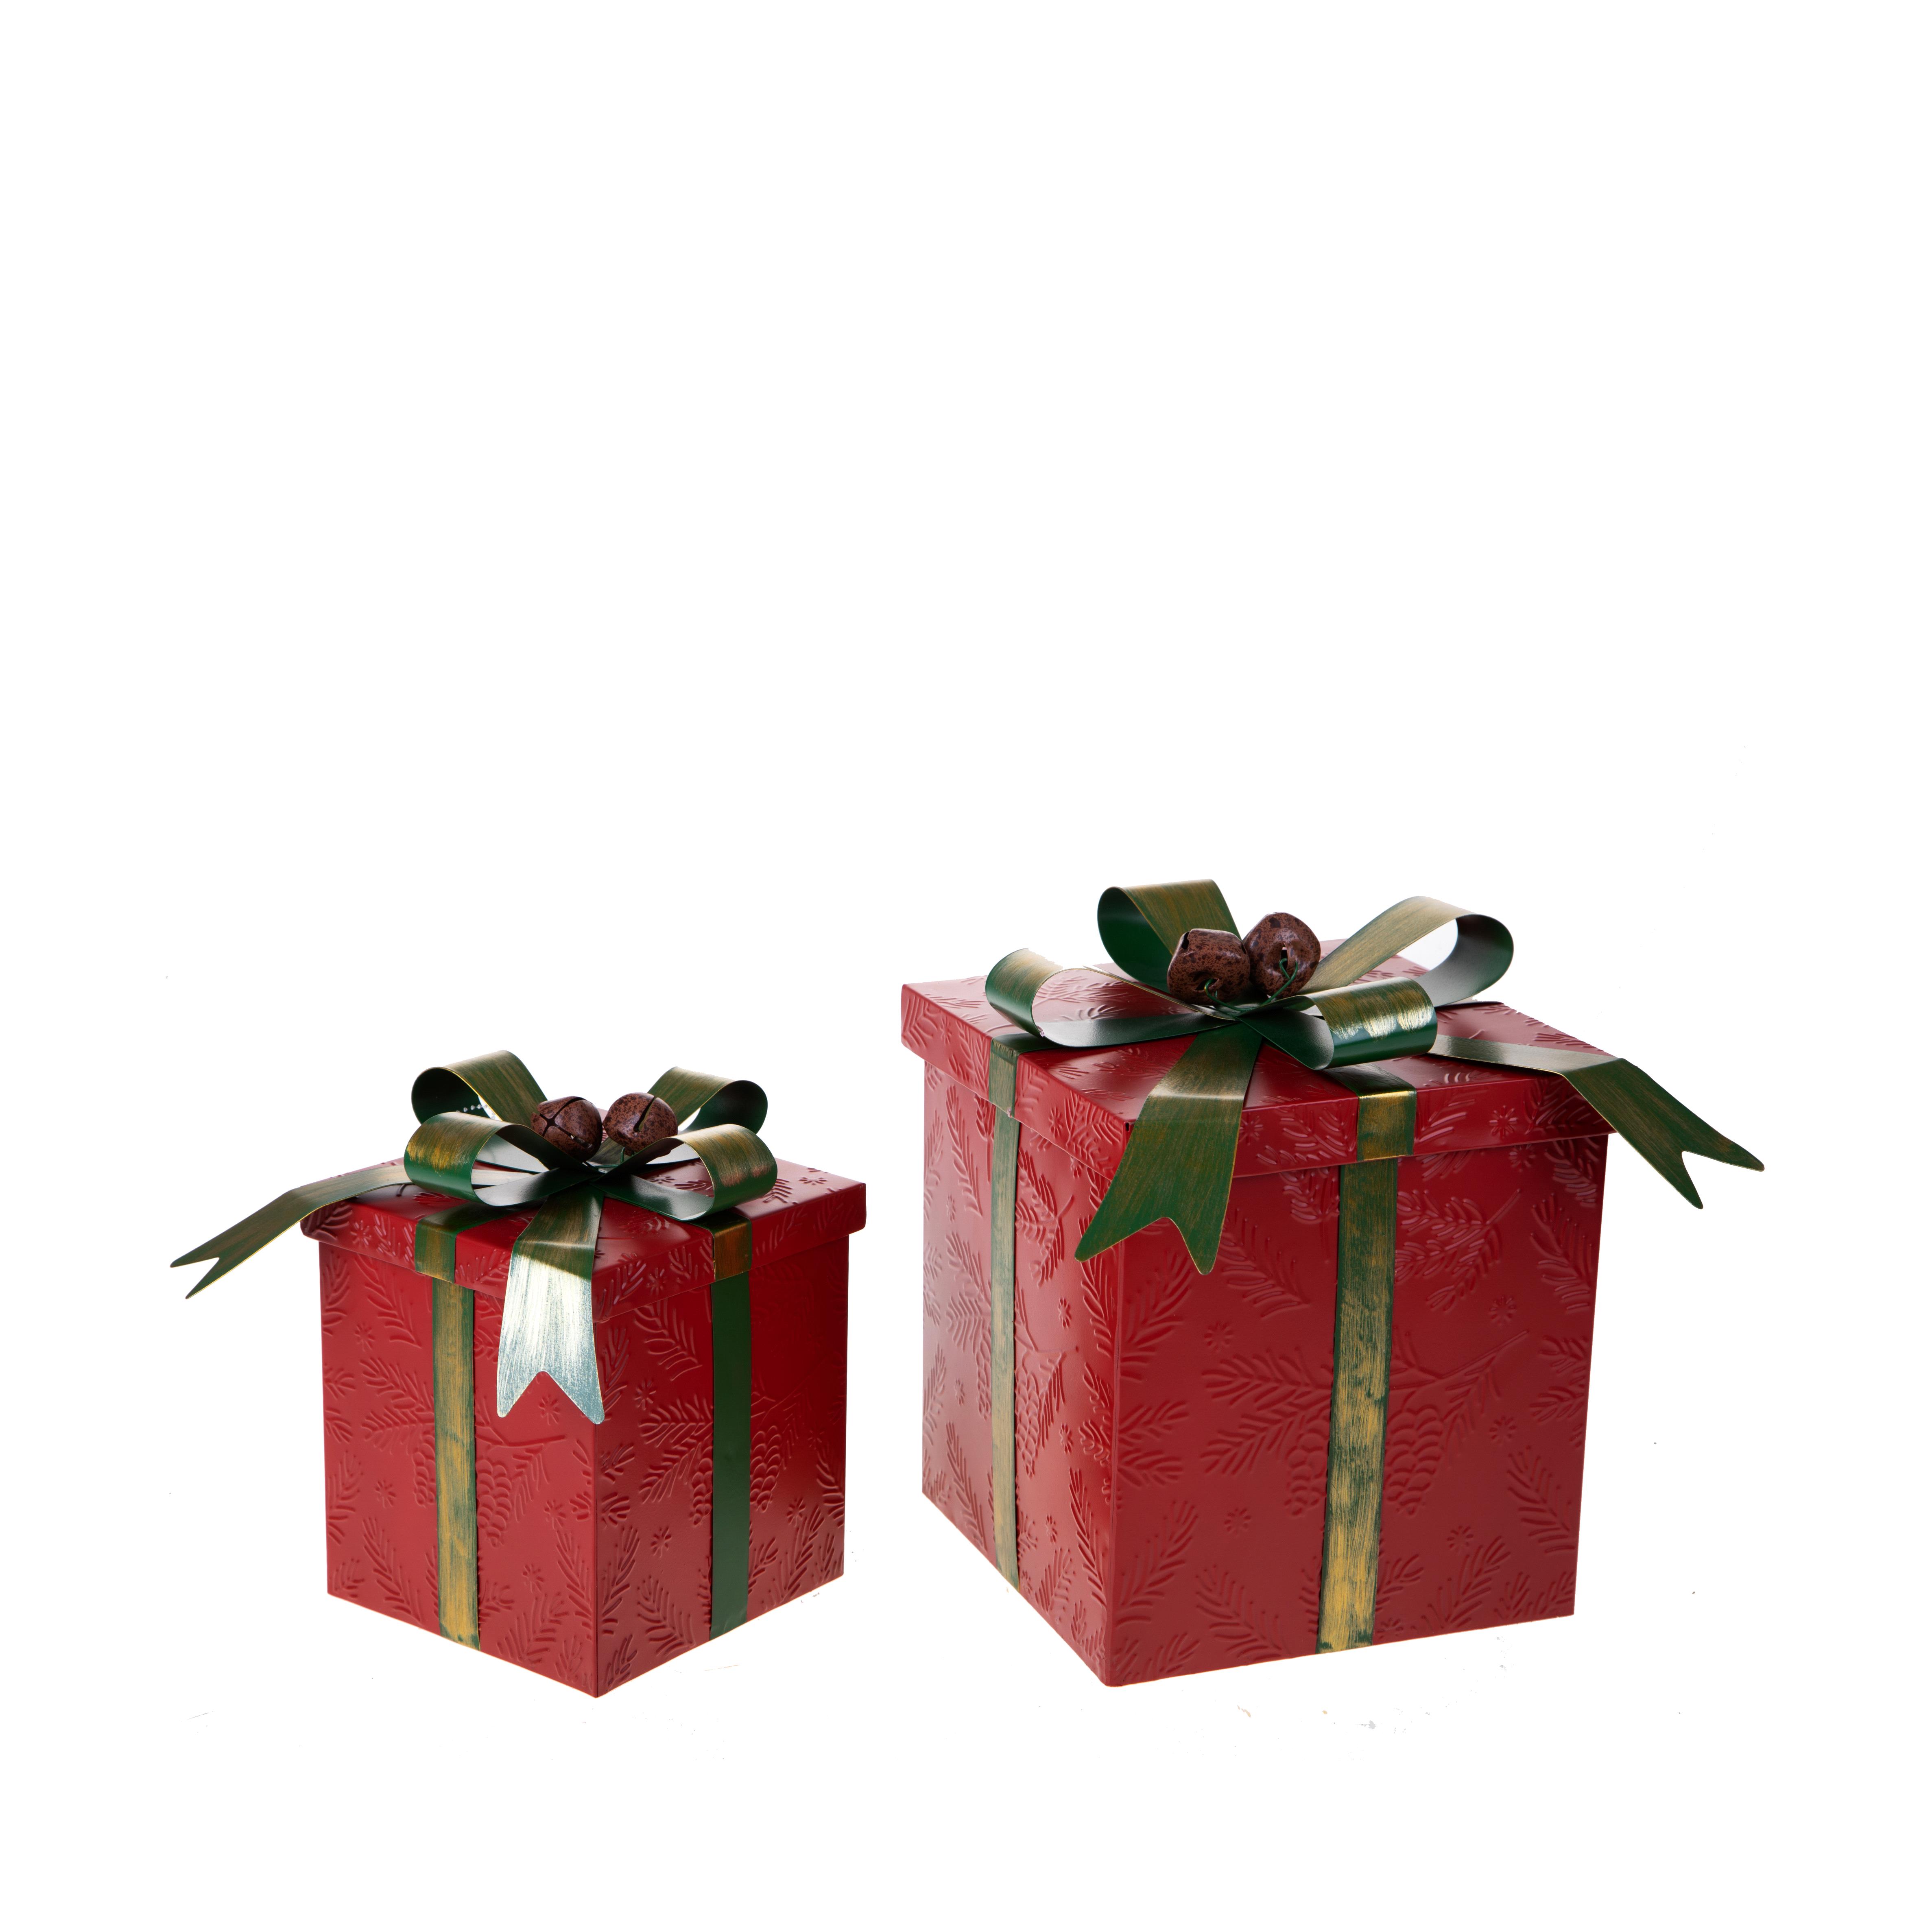 CHRISTMAS ITEMS, BOXES, BASKETS,DISHES, VARIOUS BAGS AND CONTAINERS, SET/2 PACCHI DONO C/FIOCCO H.22 CM